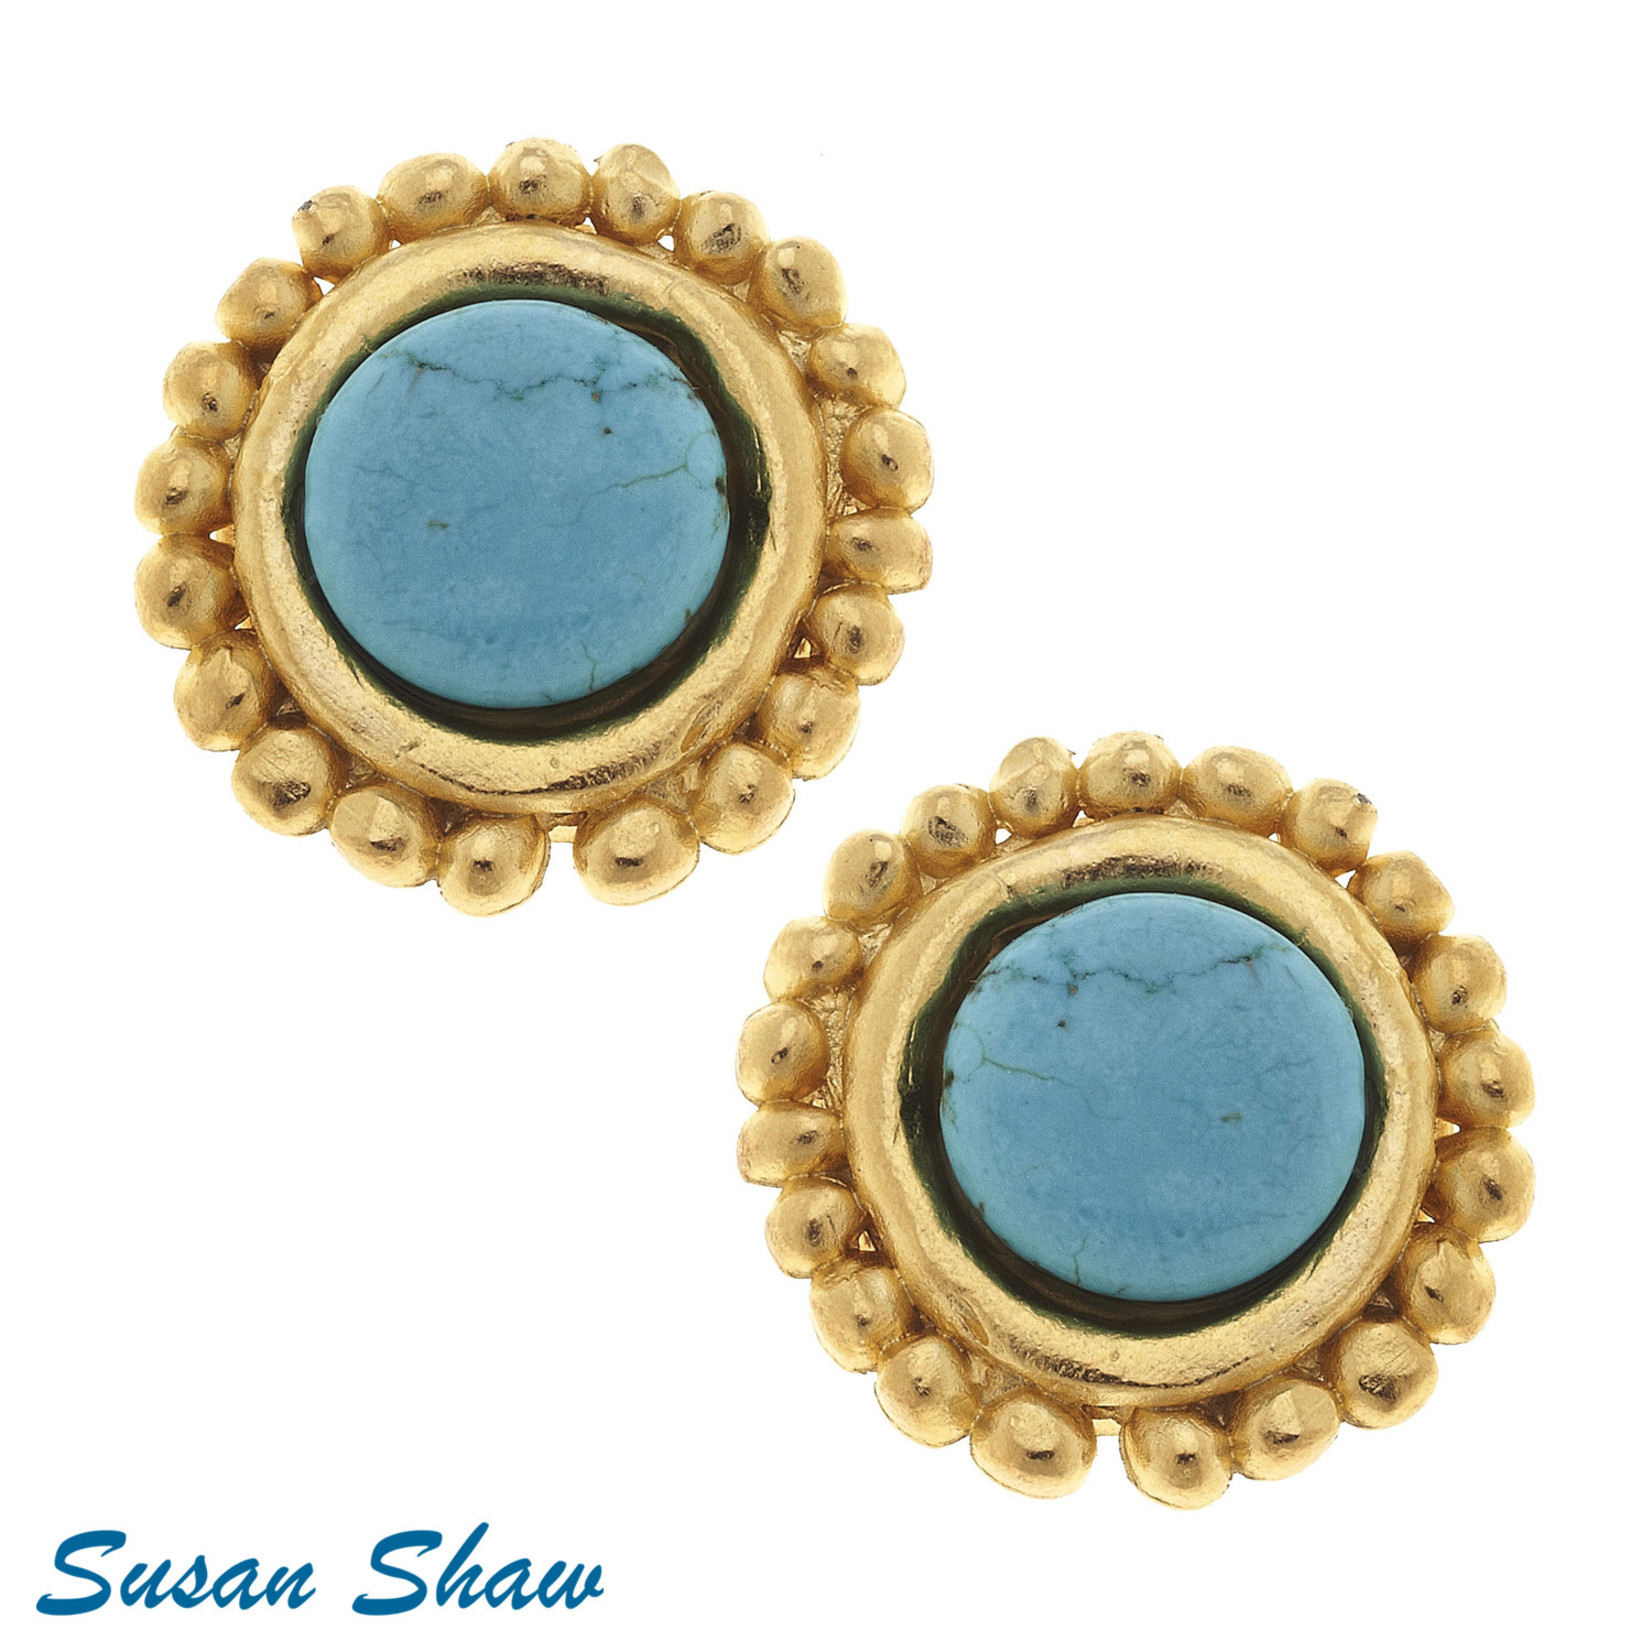 Susan Shaw Susan Shaw Round Turquoise Clip Earrings